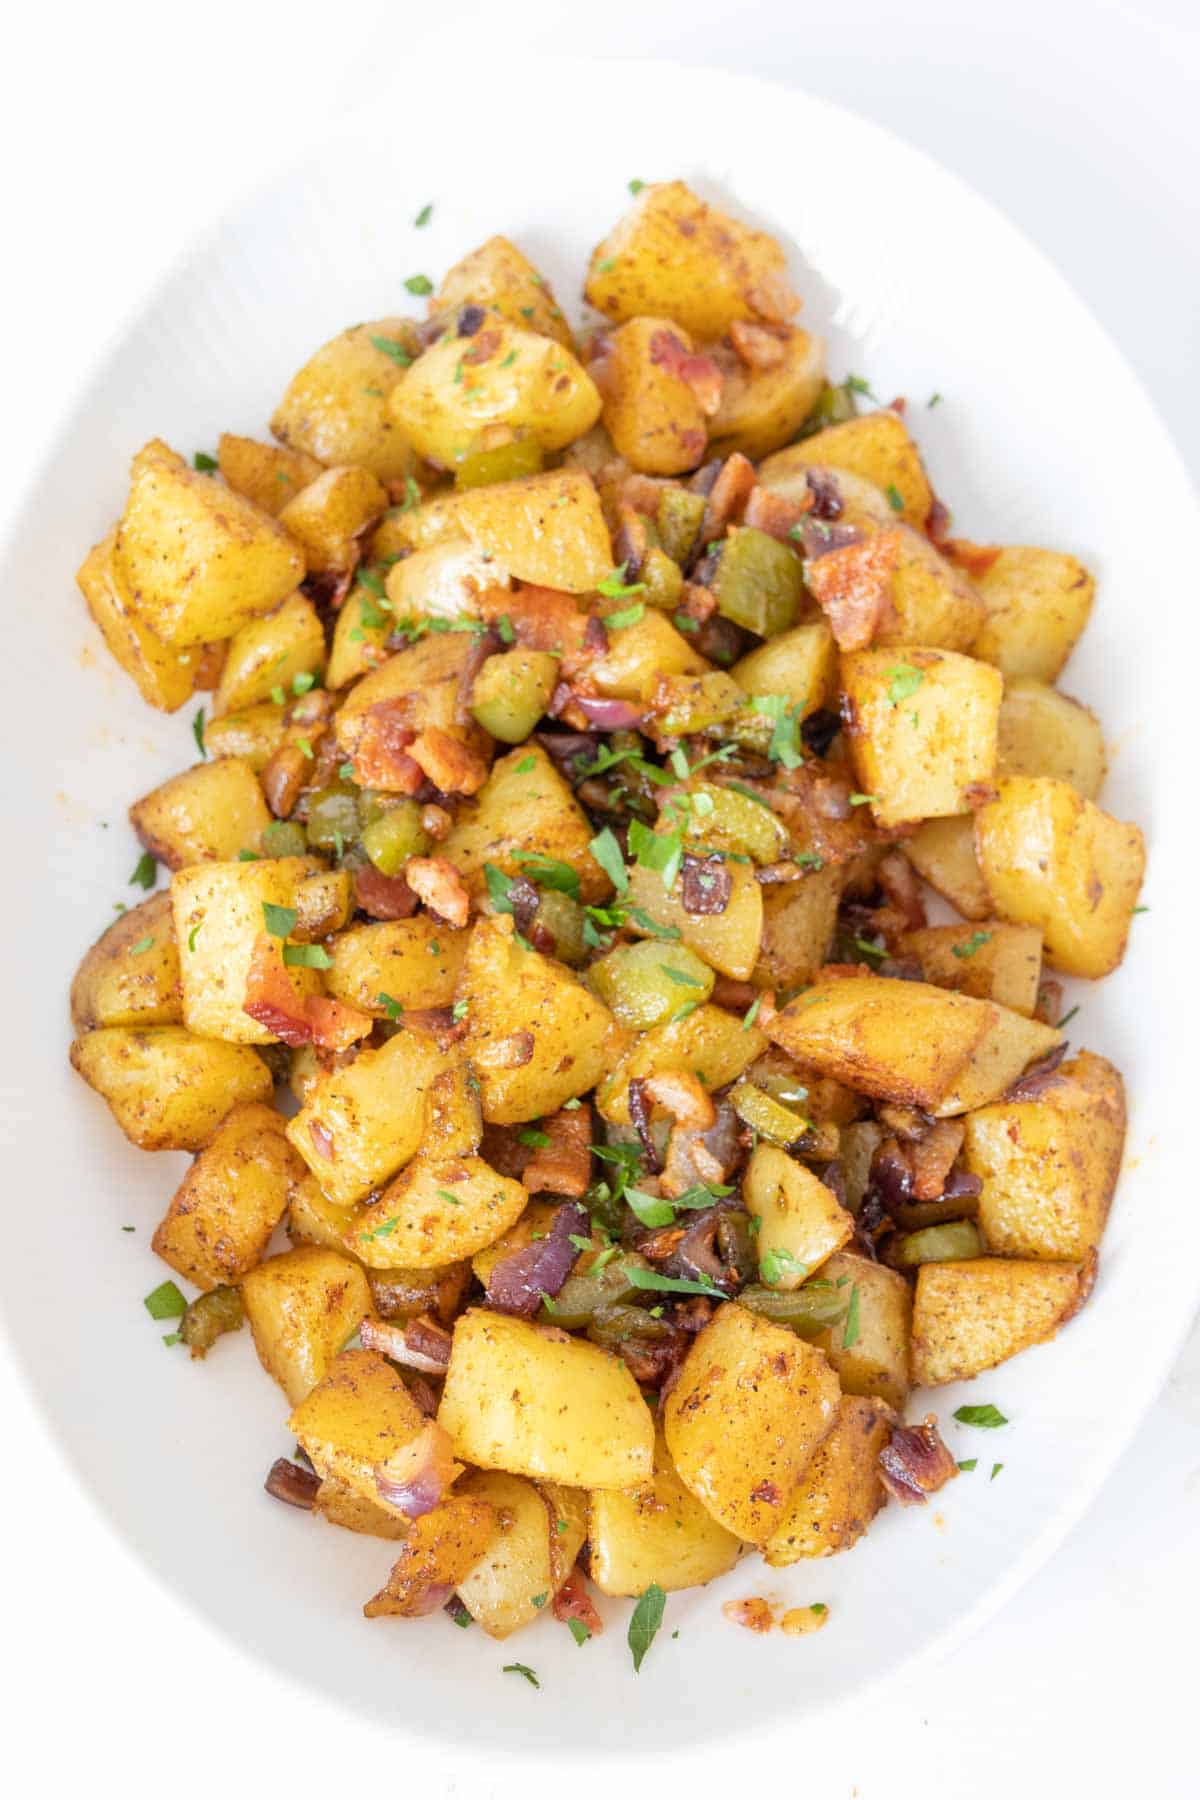 Roasted breakfast potatoes on a white serving plate.